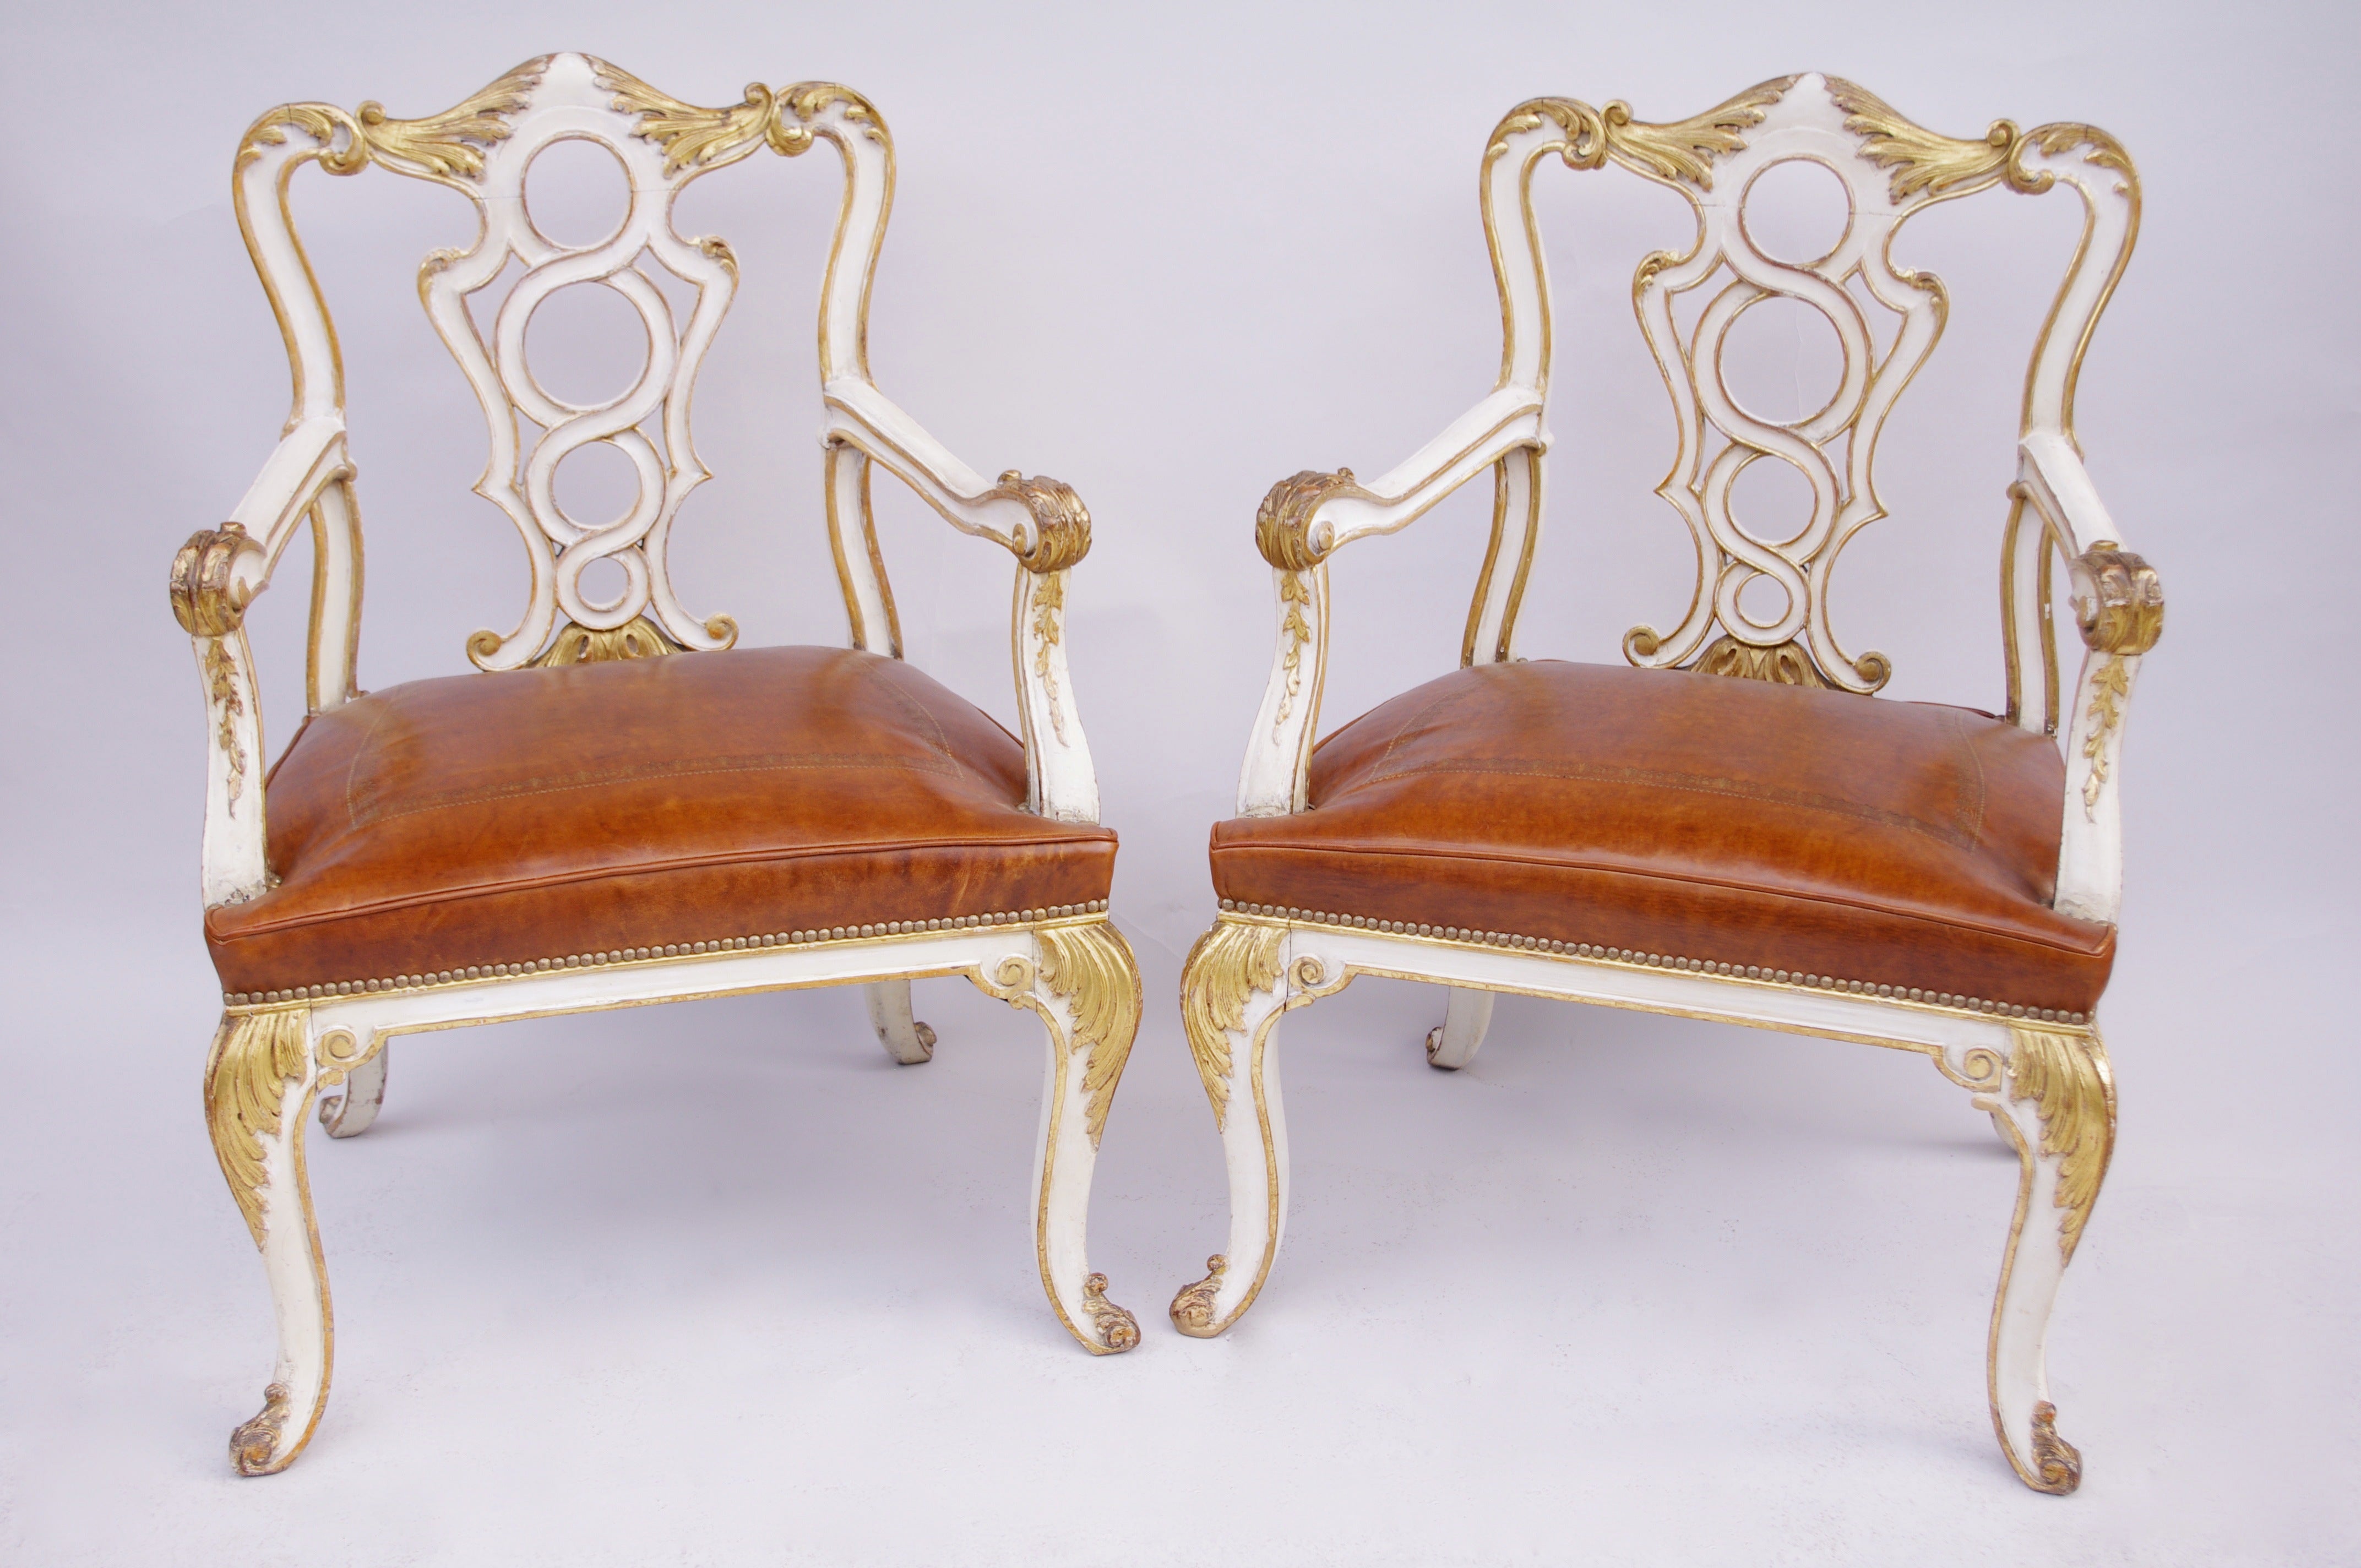 Pair of Large "Gondola" Armchairs With Brown Leather, circa 1925 